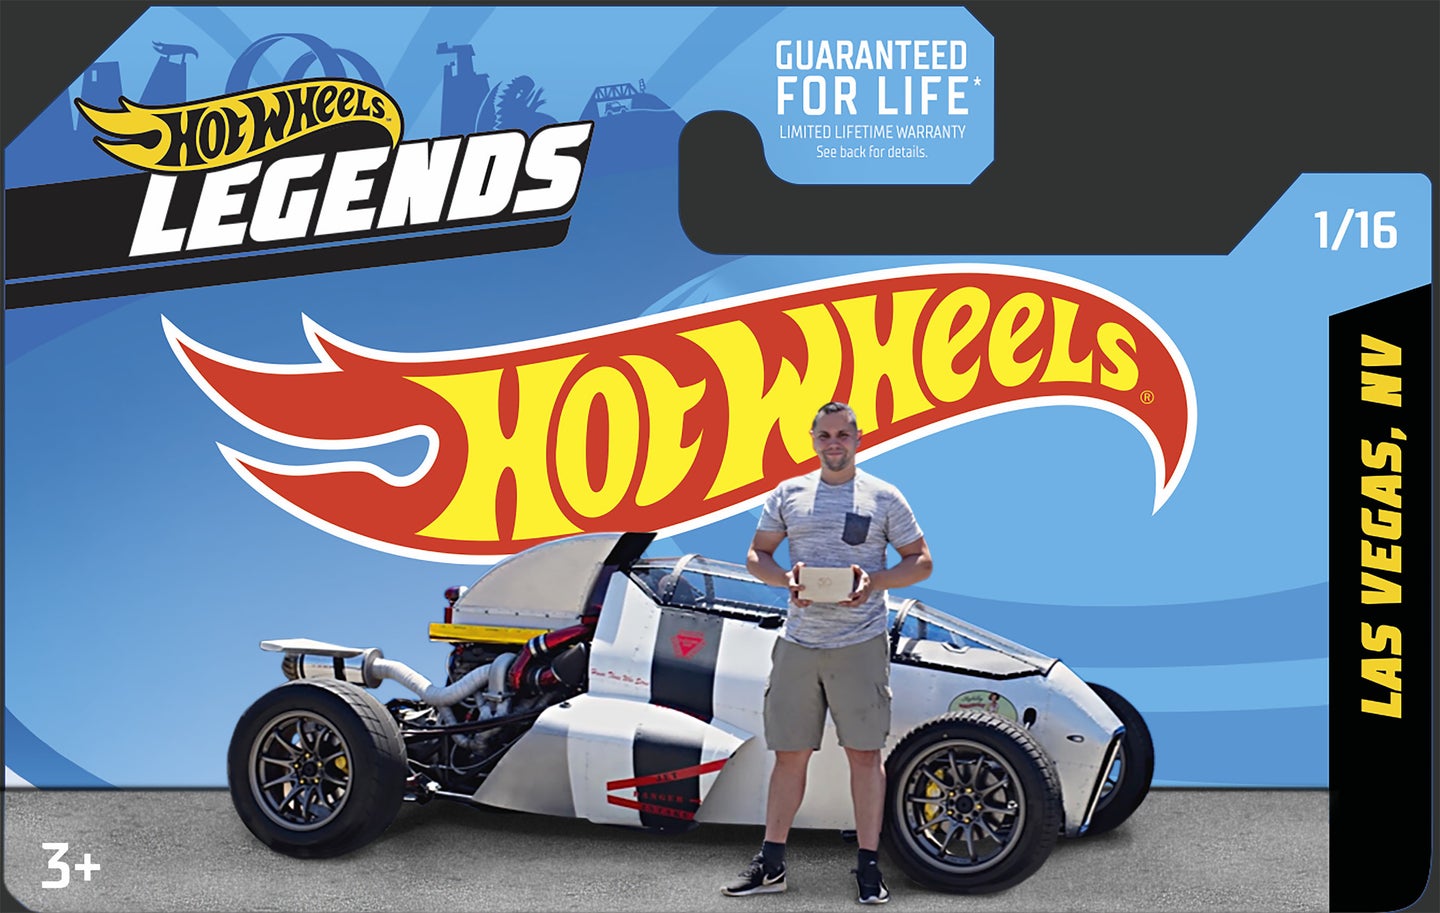 Hot Wheels Turned Fan’s Full-Size, Homebuilt Hot Rod Into Officially Licensed Toy